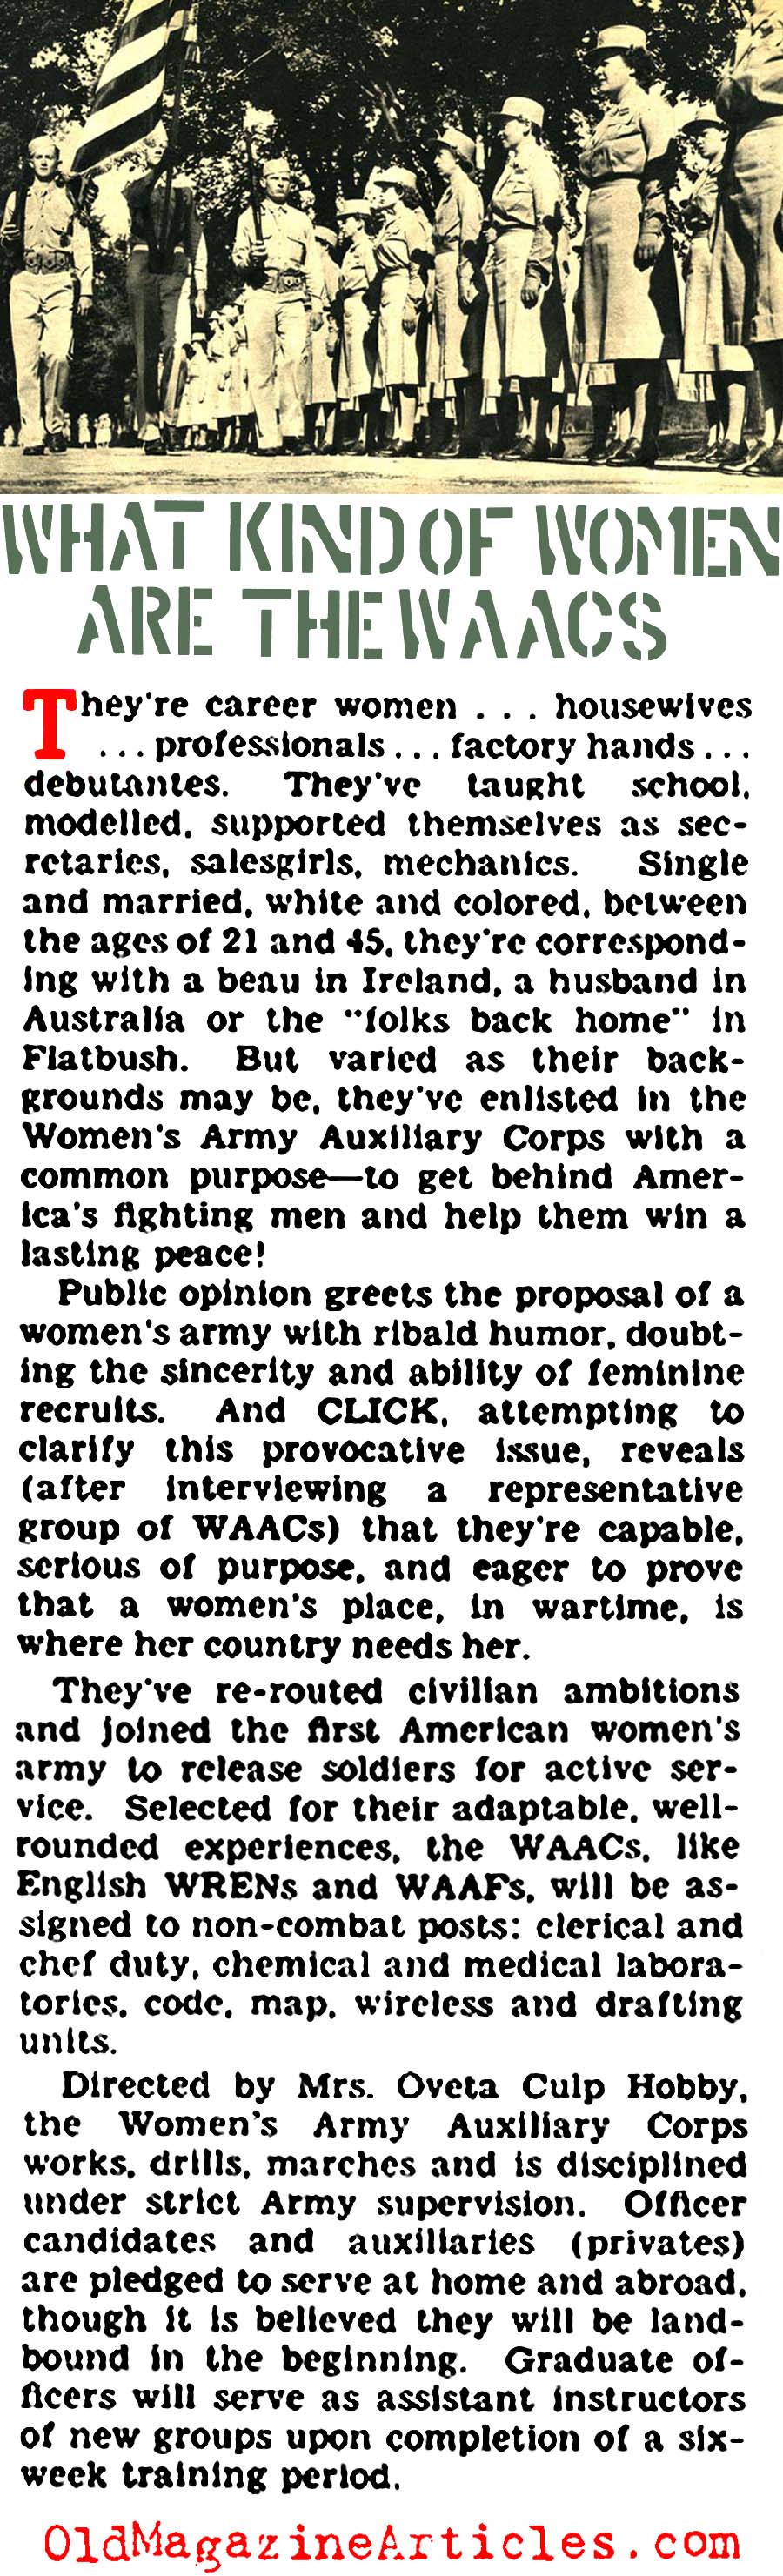 ''What Kind of Women are the WAACs?'' (Click Magazine, 1942)